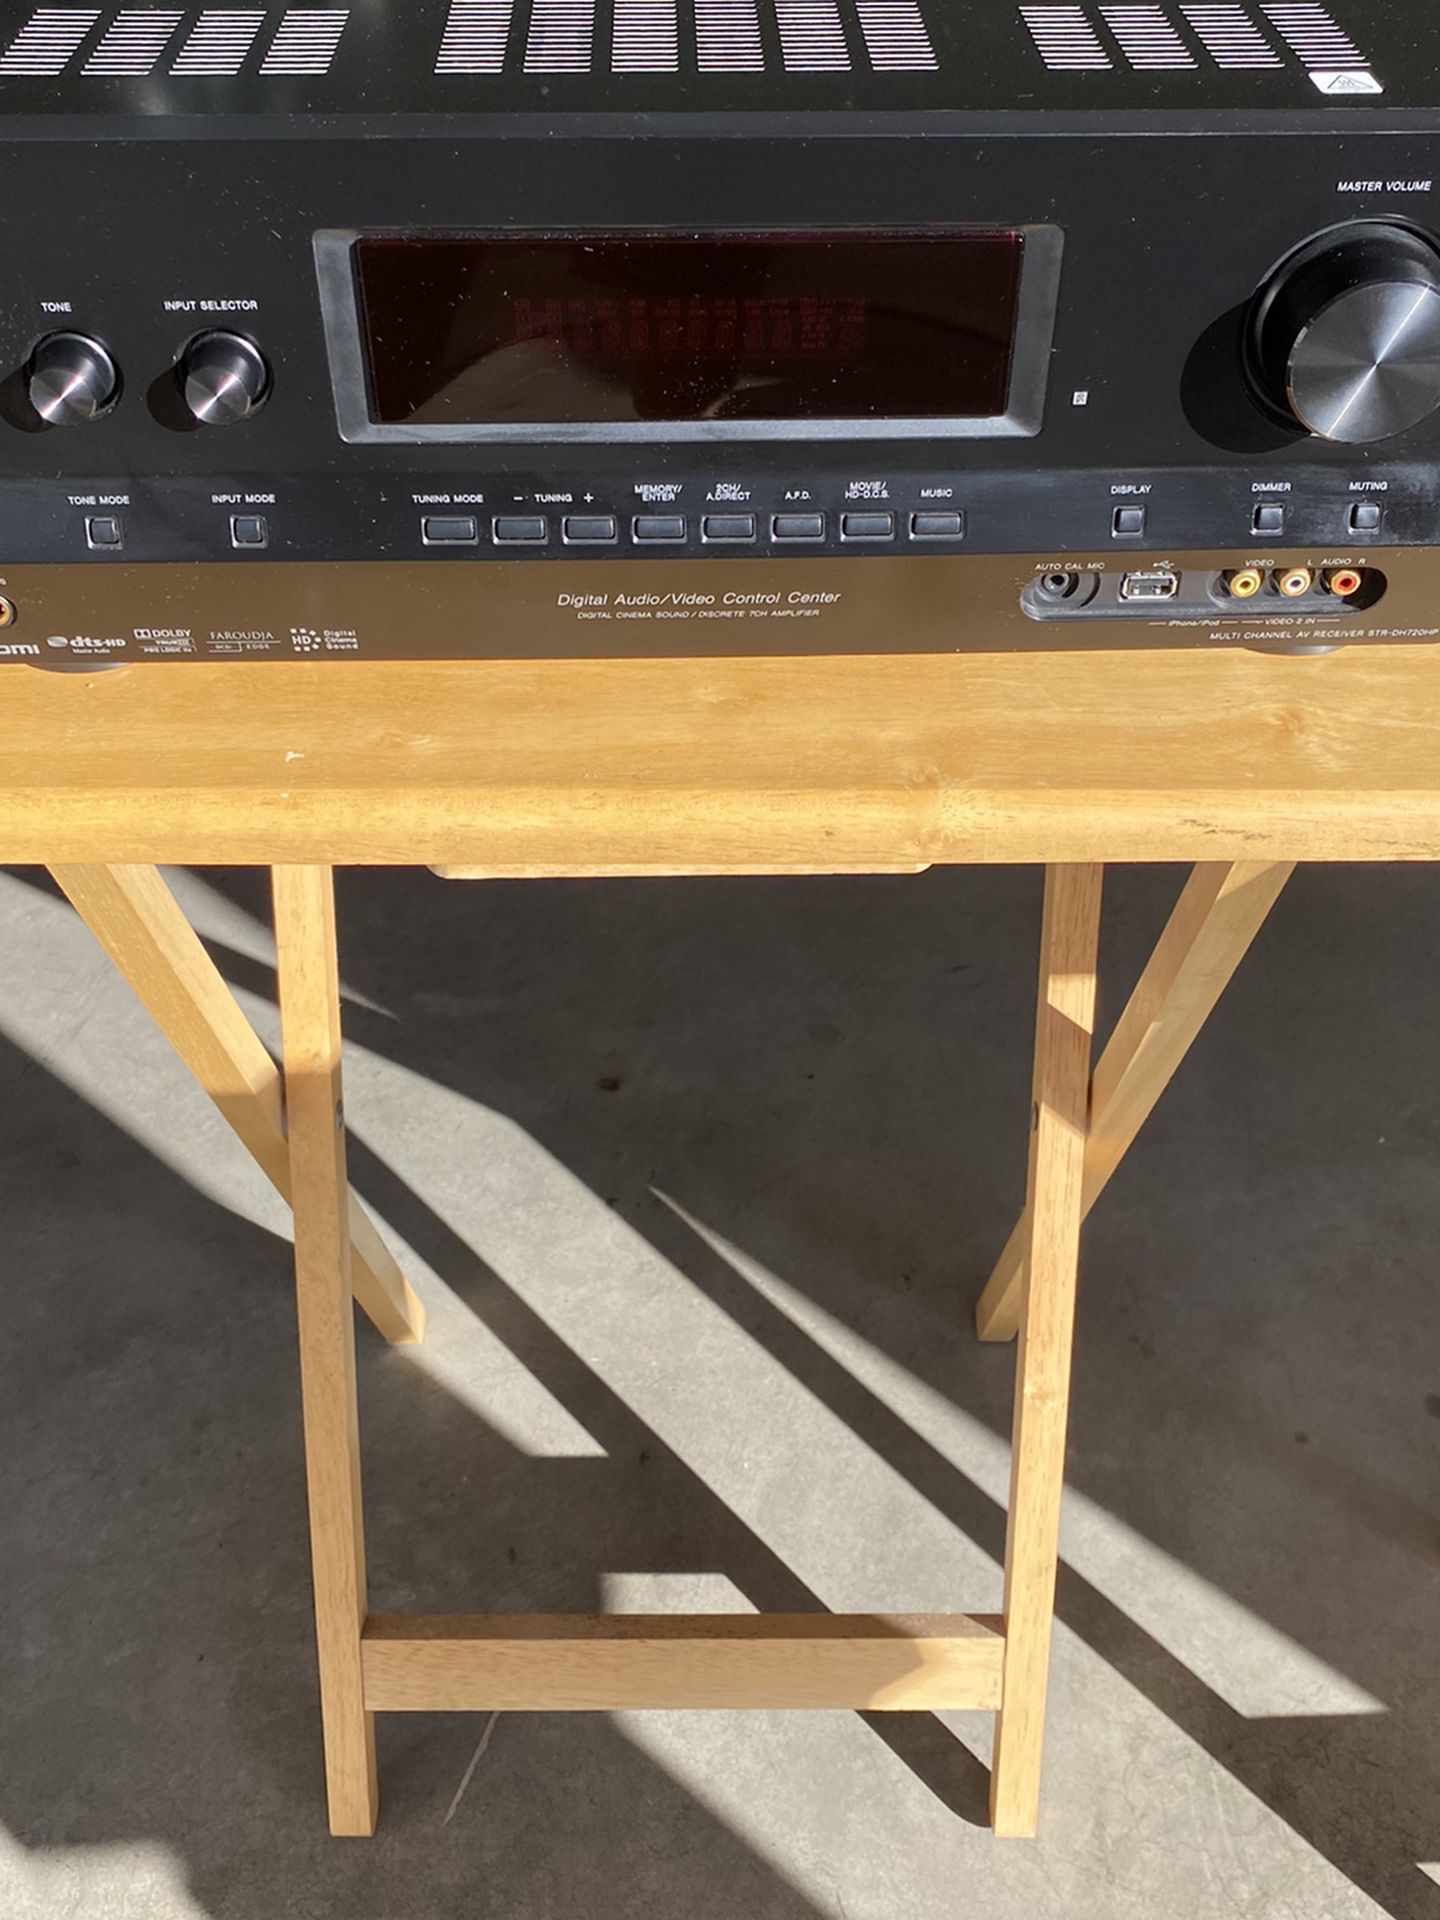 High End Stereo Equipment! Great Condition! Ready For Pick Up!